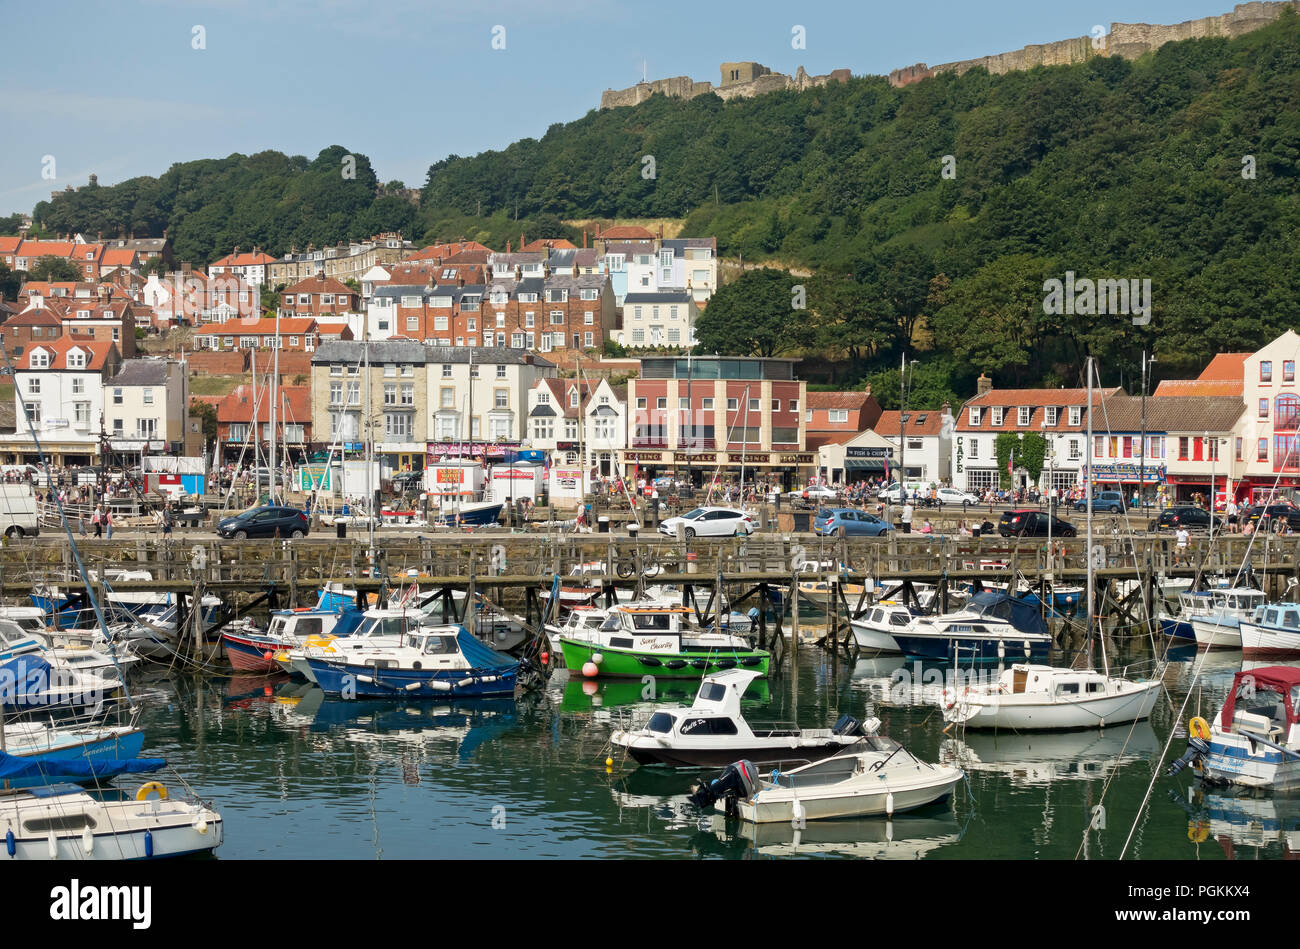 Boats moored in the harbour harbor in summer Scarborough seaside town resort North Yorkshire England UK United Kingdom GB Great Britain Stock Photo